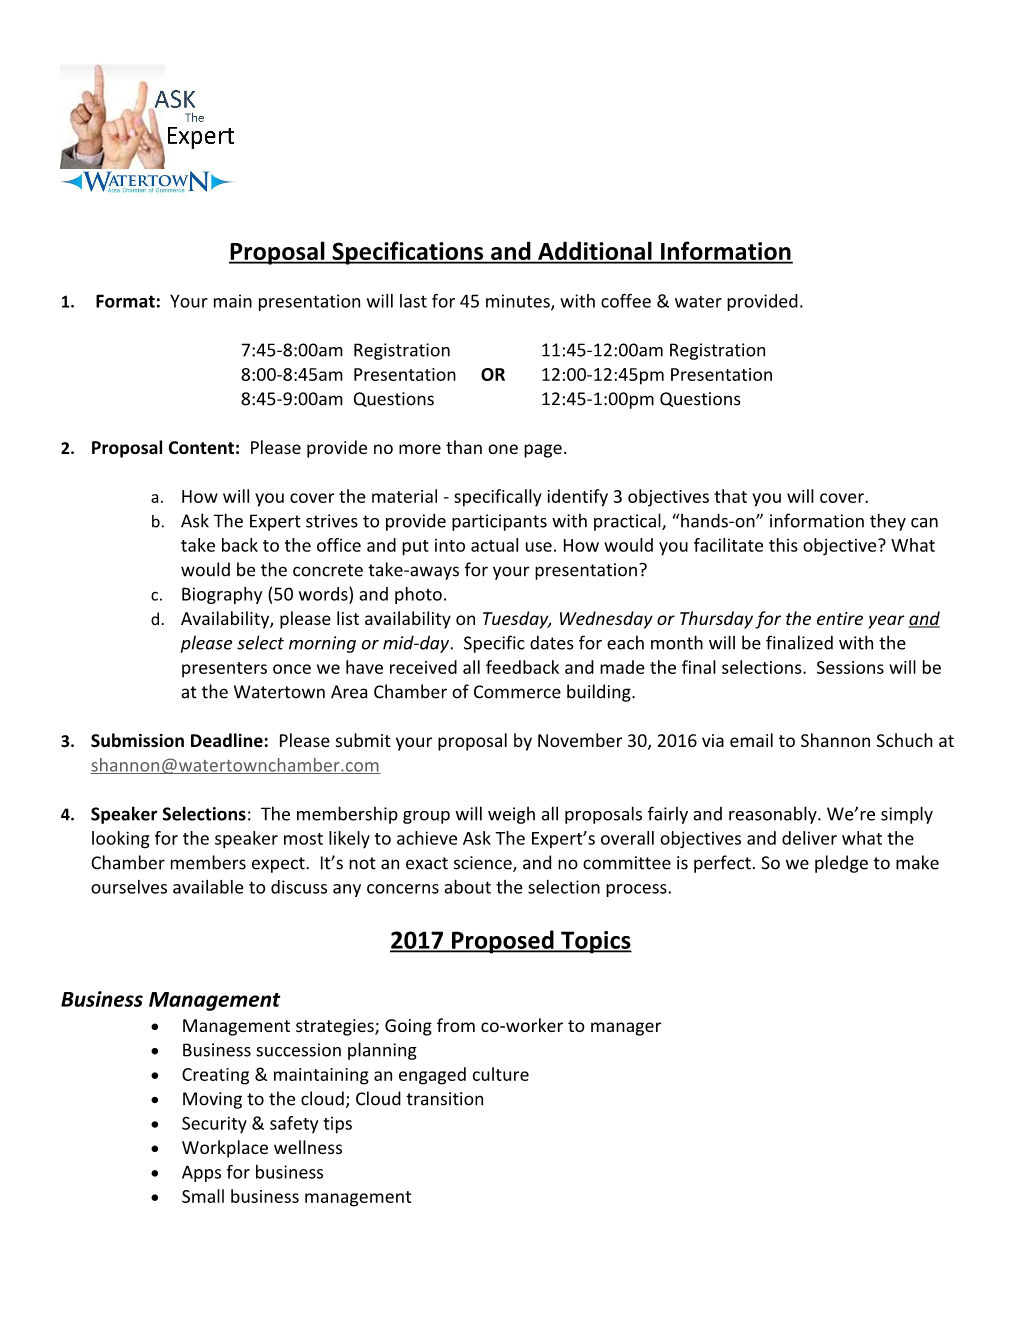 Proposal Specifications and Additional Information